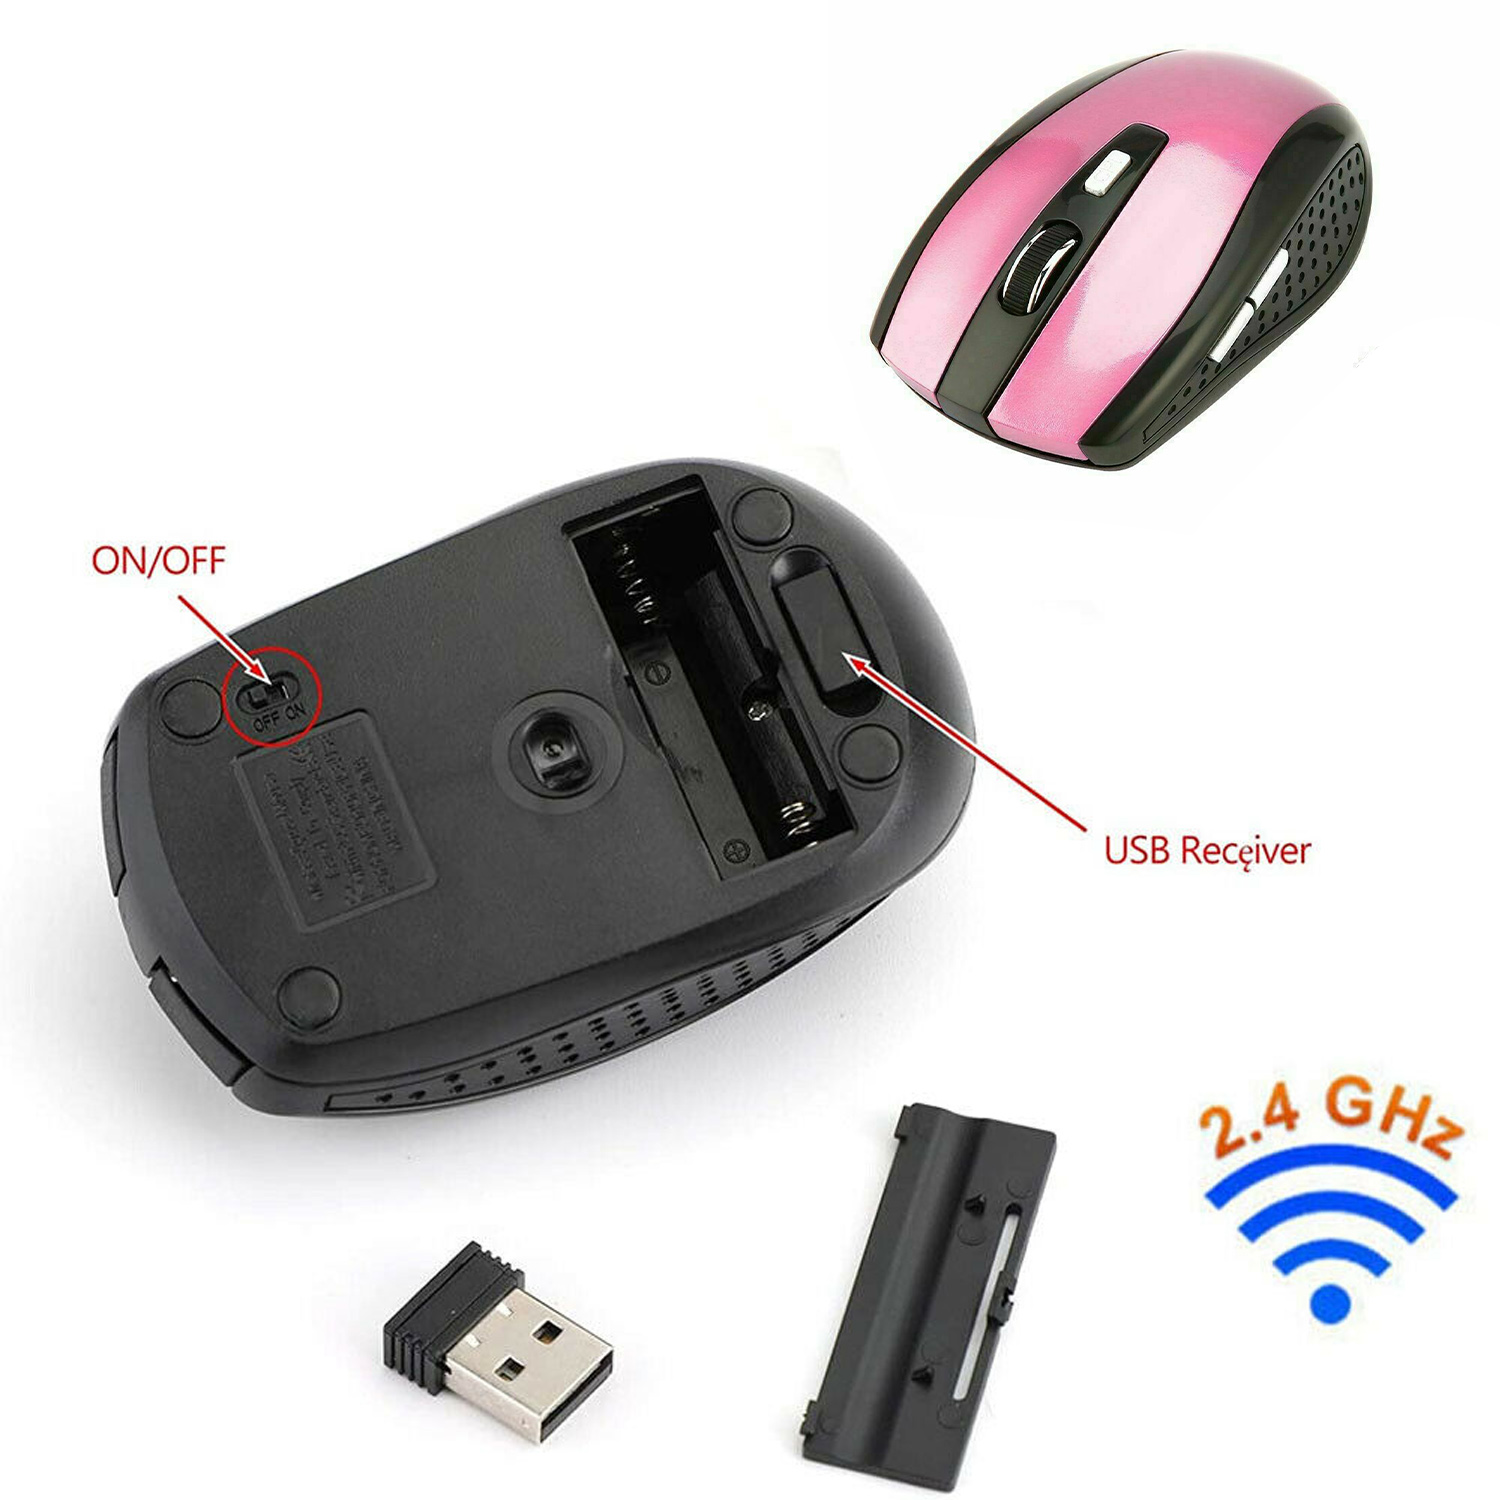 2Pcs Wireless Optical Pink Mouse Mice & USB Receiver For PC Laptop Computer DPI Black - image 3 of 7